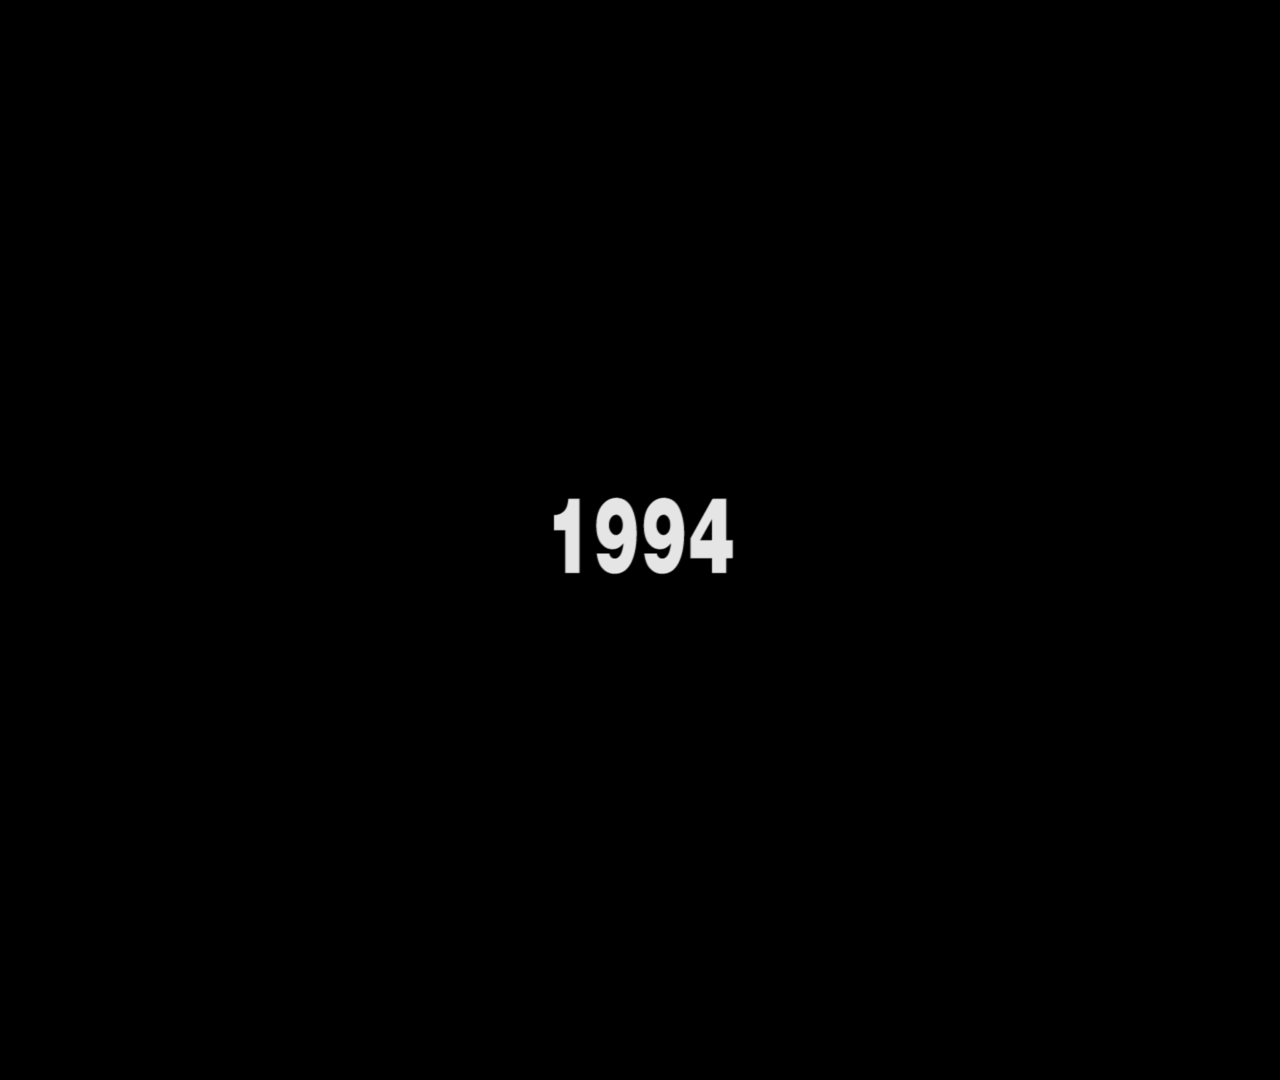 Hashbrown – "1994" (Teaser) Directed by D Randle